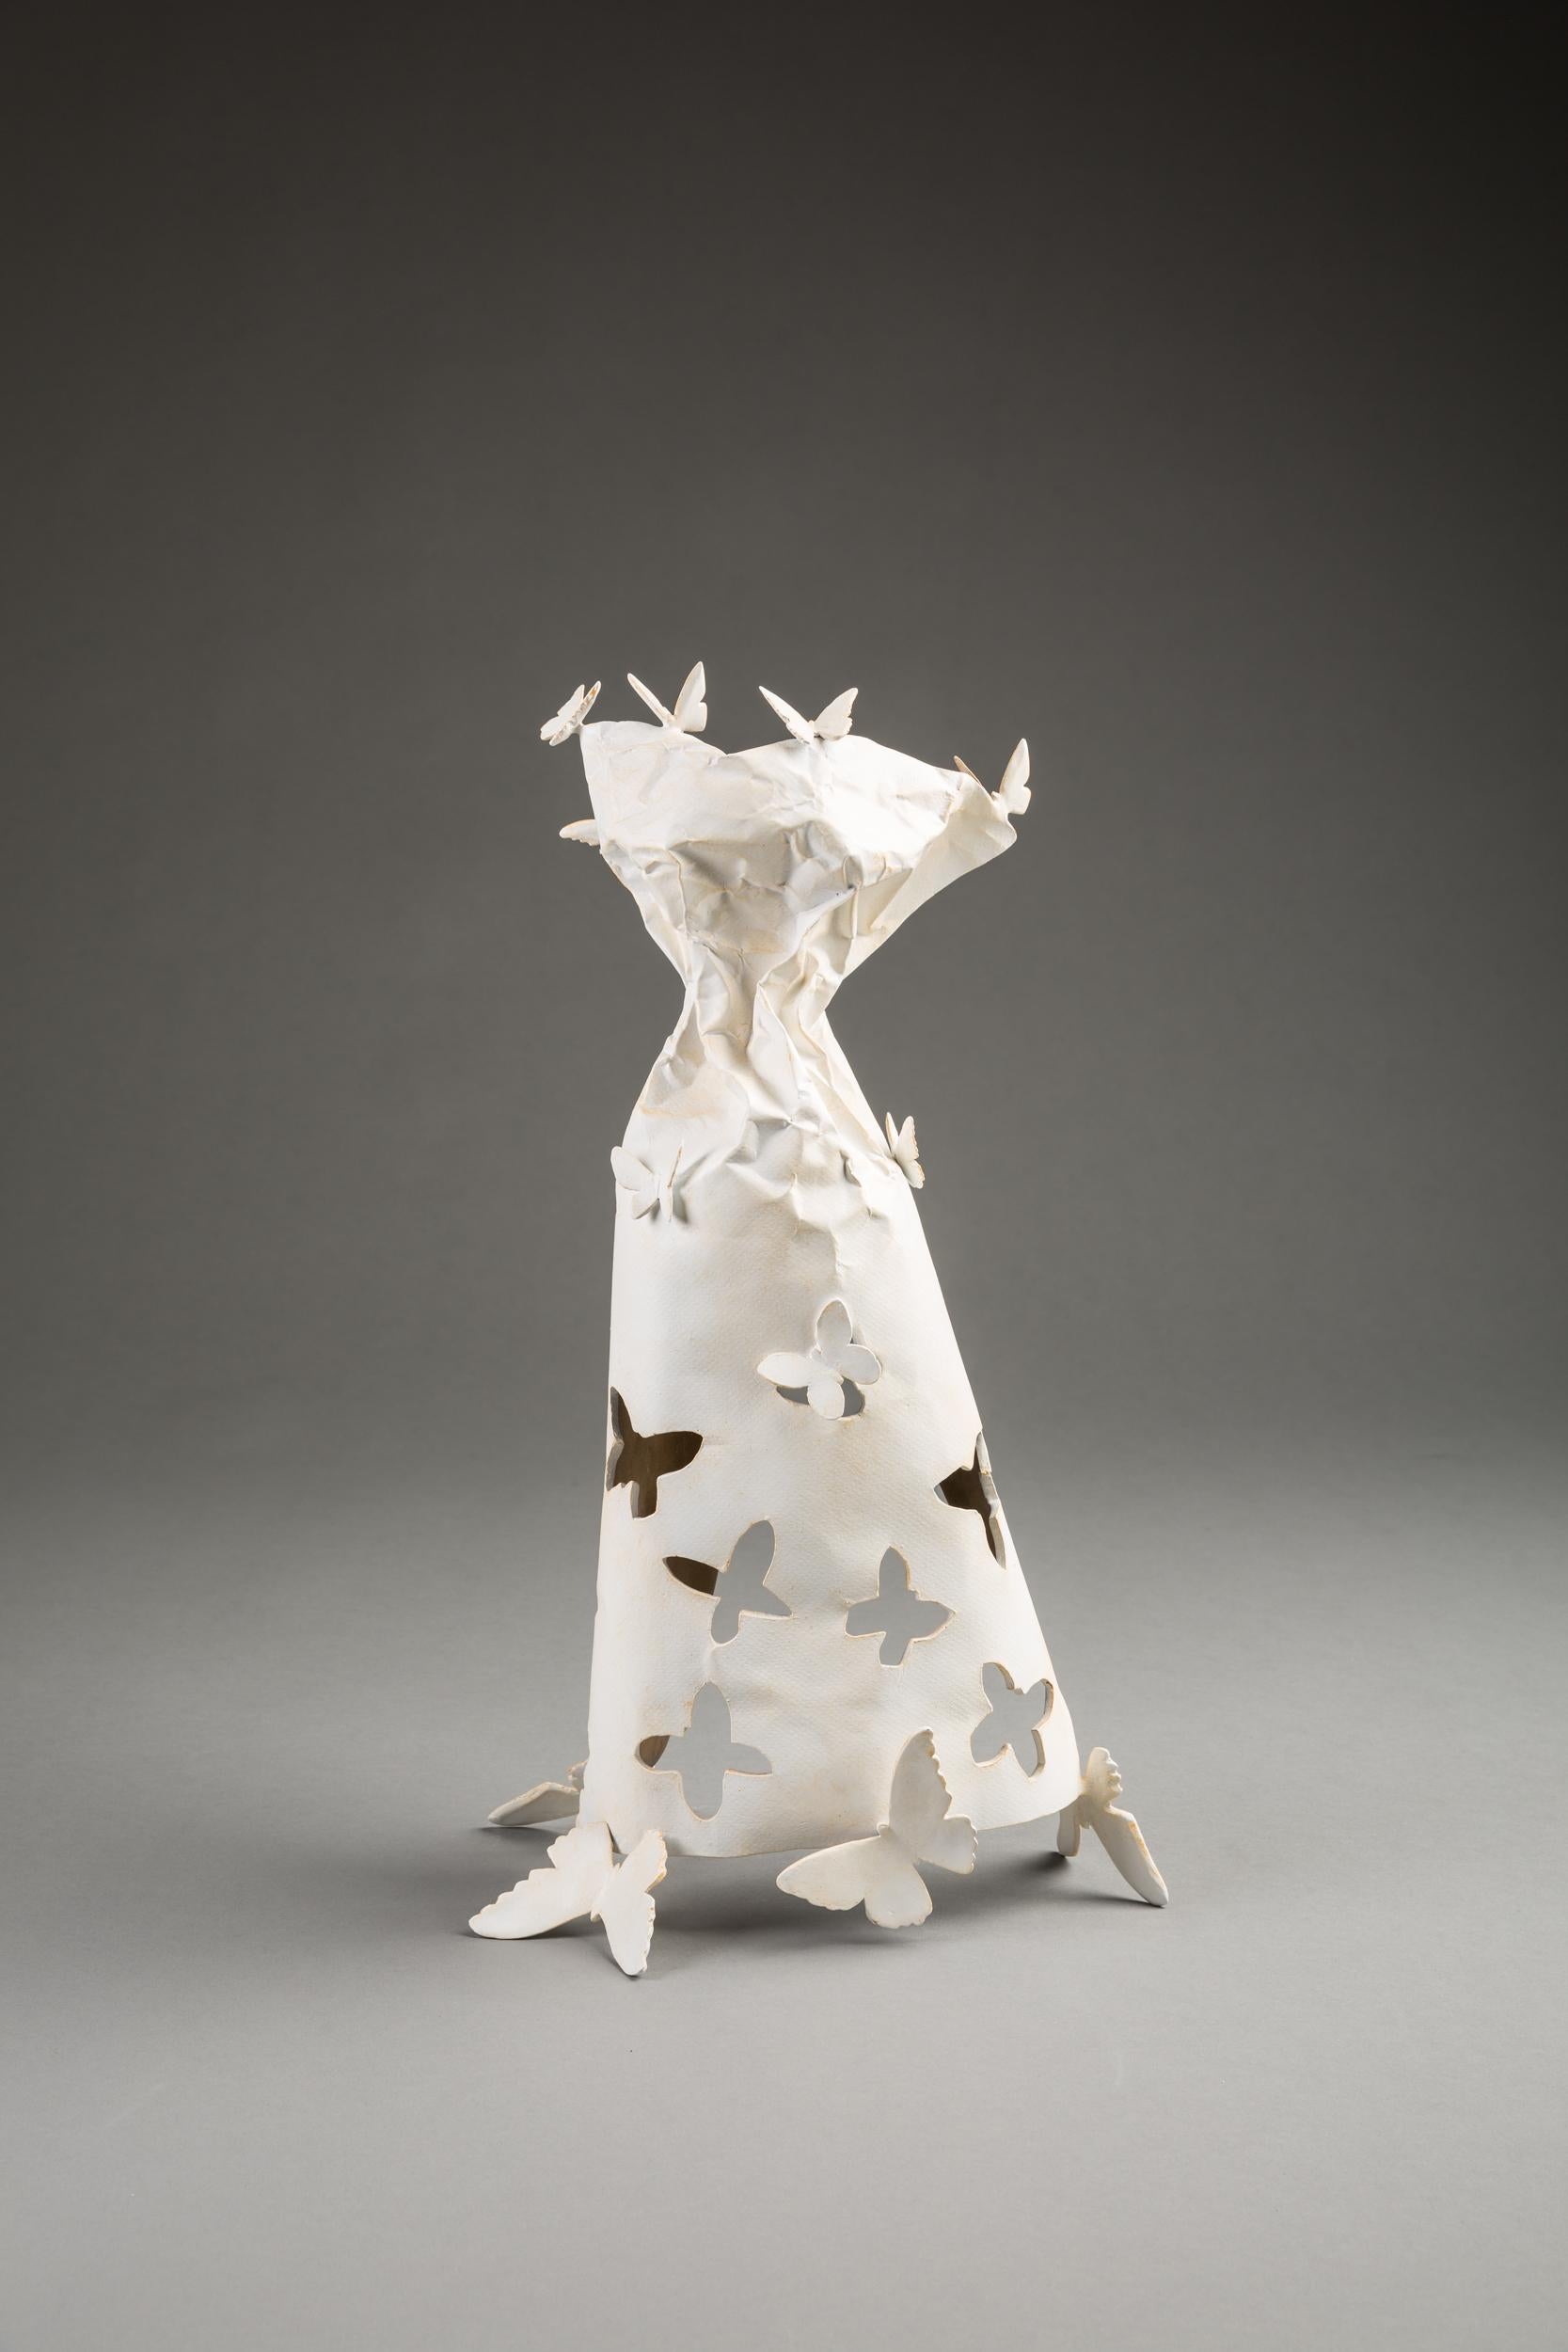 Carried Away (Maquette) AP #5/6 - Kevin Box and Jennifer Box